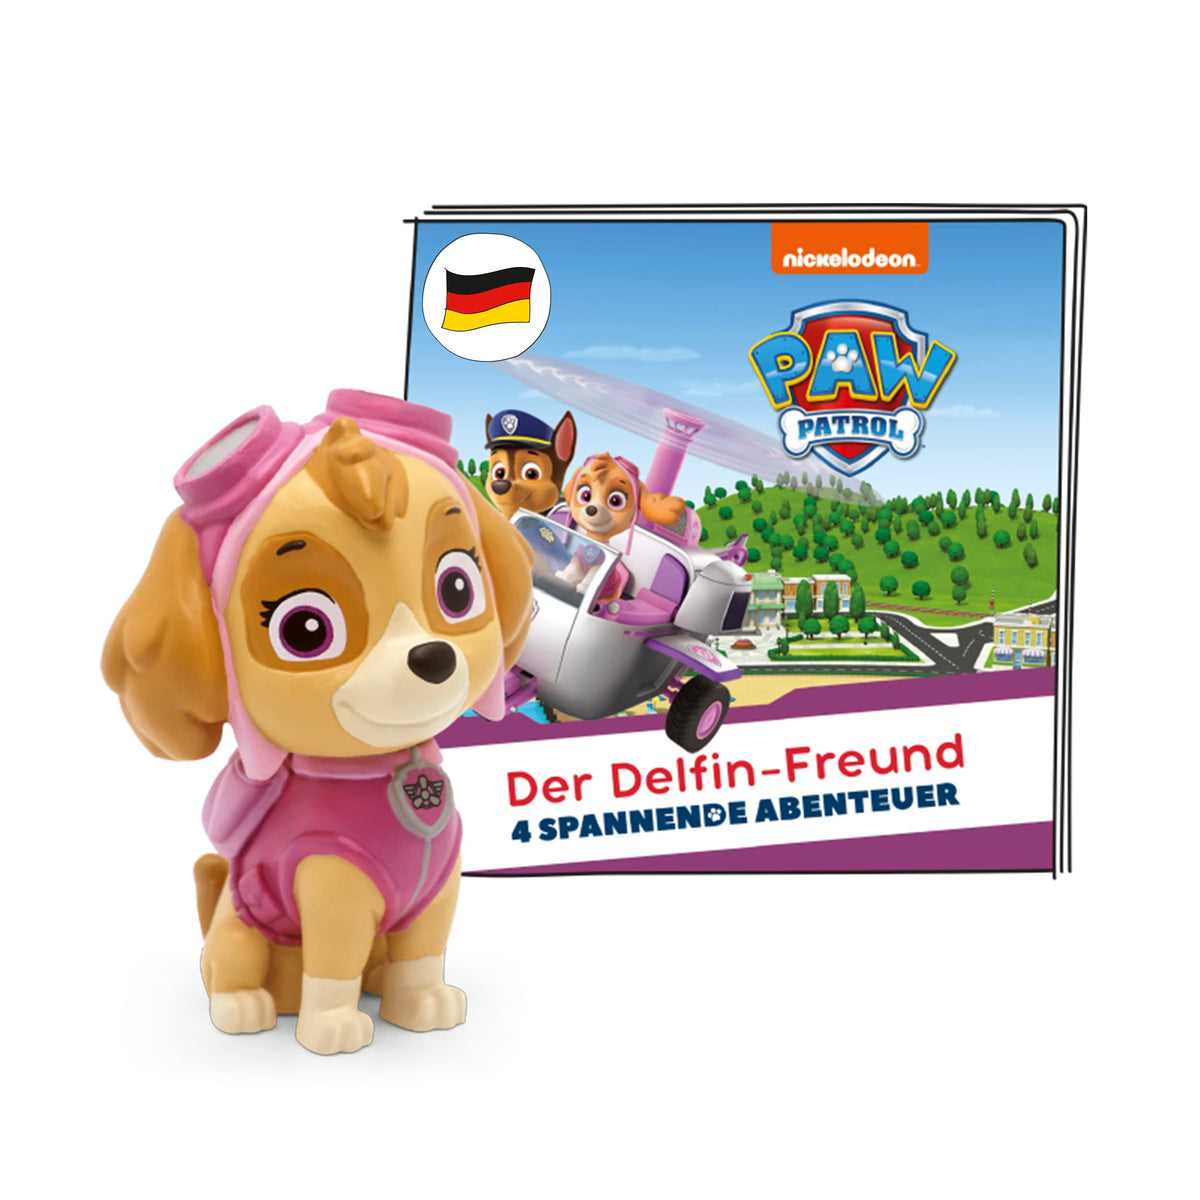 tonies Audio Figures for Toniebox, Paw Patrol - The Dolphin Friend, Audio Play with Music for Children from 3 Years, Playing Time Approx. 56 Minutes